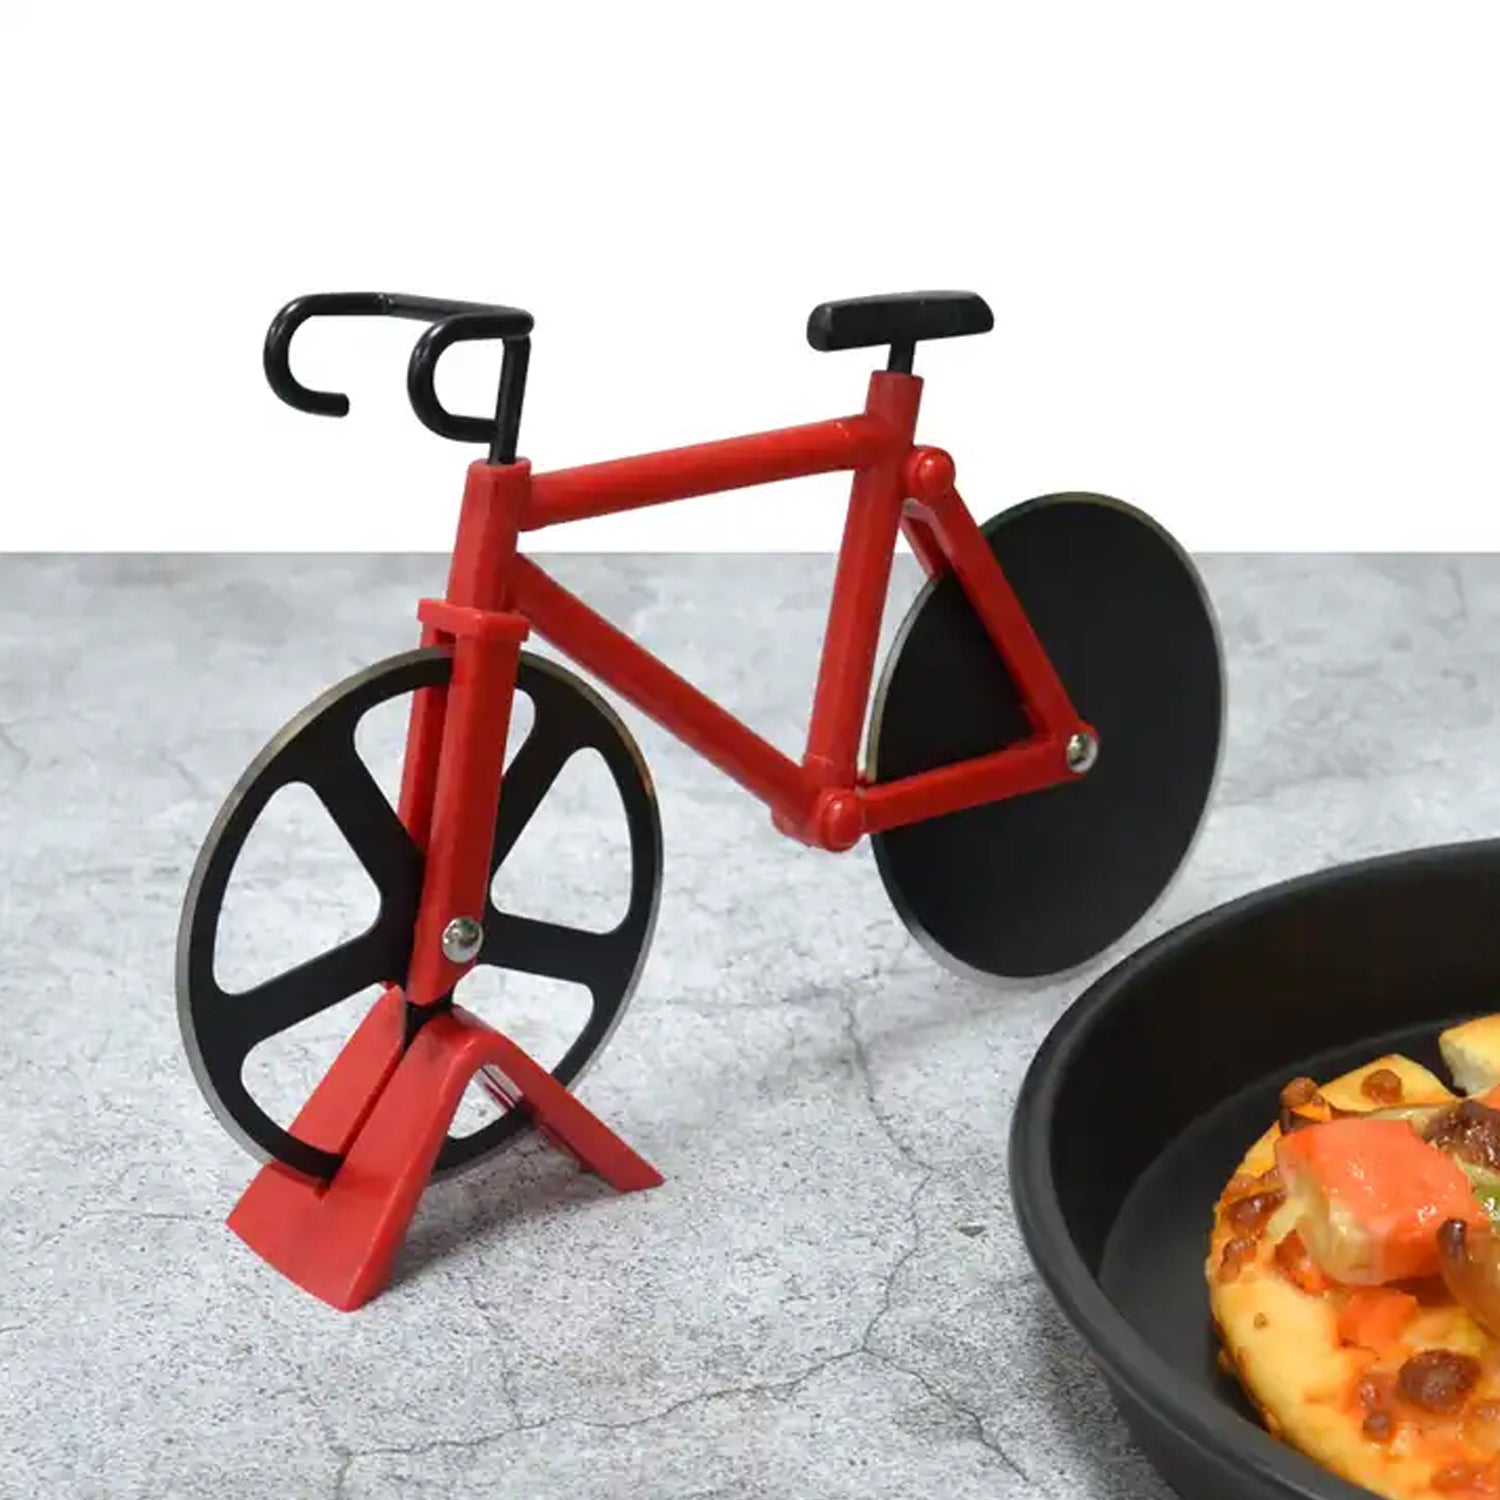 Stainless steel Bicycle shape Unbreakable Handle Pizza cutter | Pastry Cutter | Pizza Slicer with Grip on Handle and Stainless Steel Blade (1 Pc)